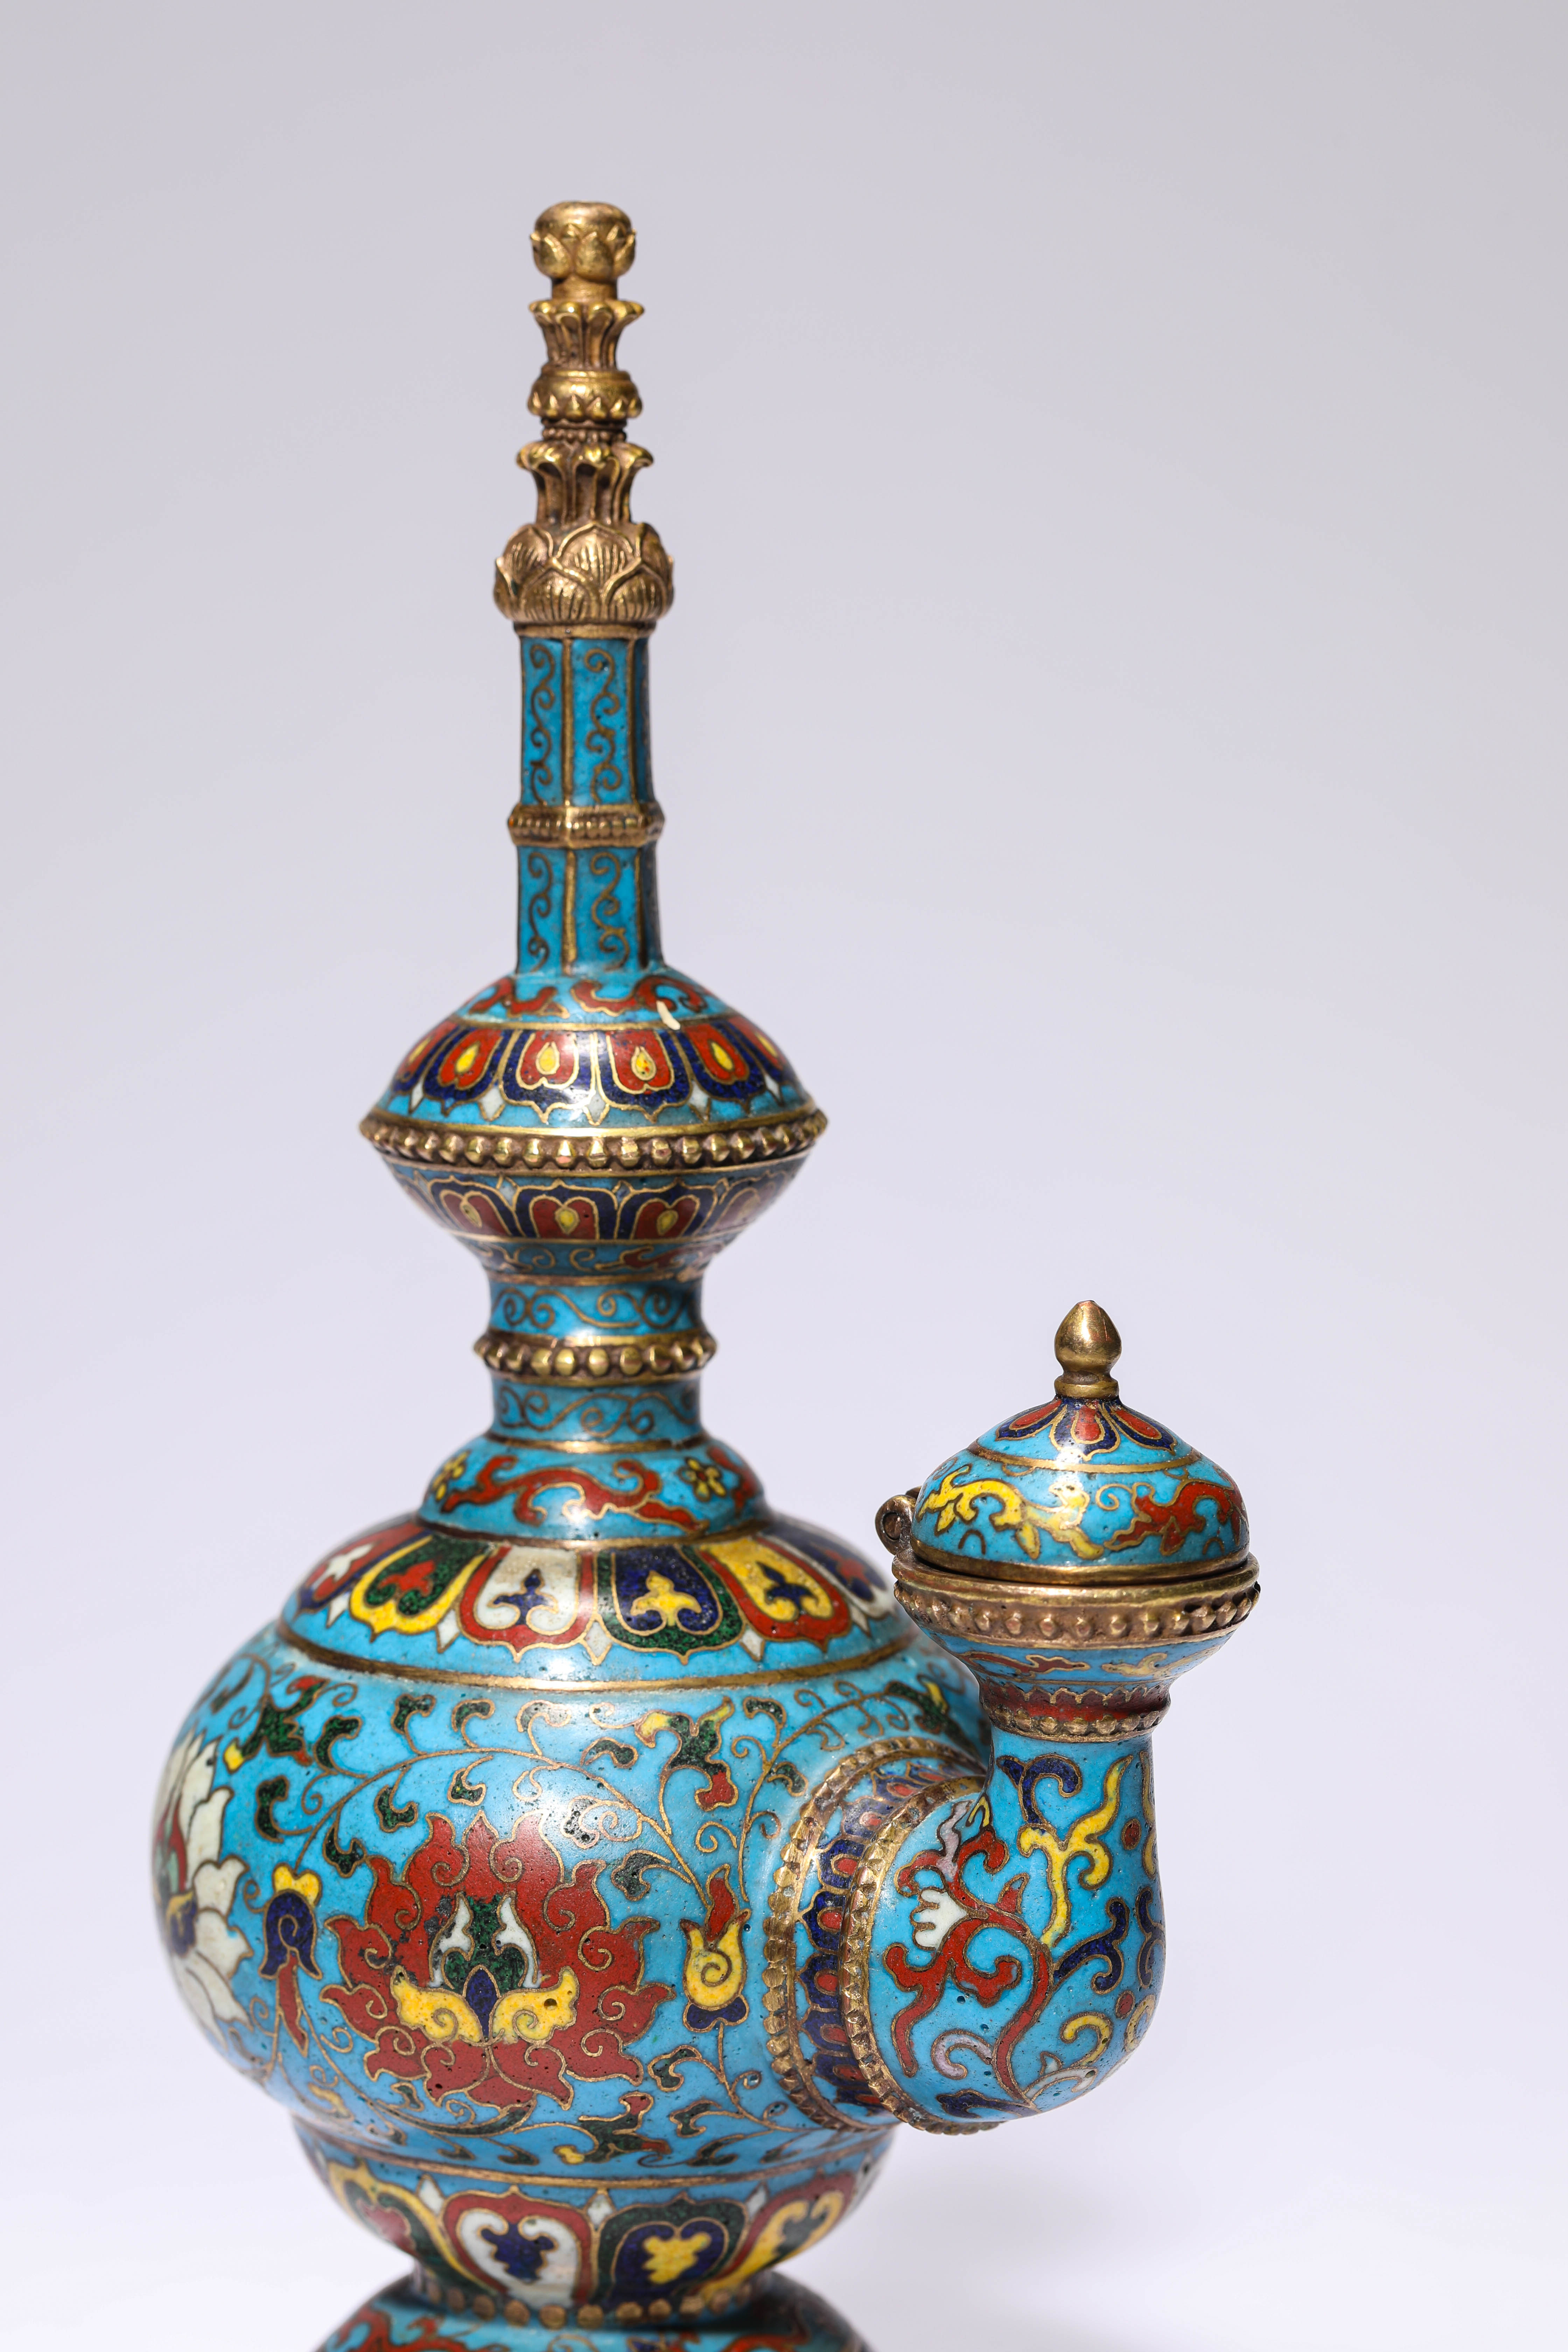 FINE CHINESE CLOISONNE, 17TH/18TH Century Pr.  Collection of NARA private gallary.  - Image 4 of 6